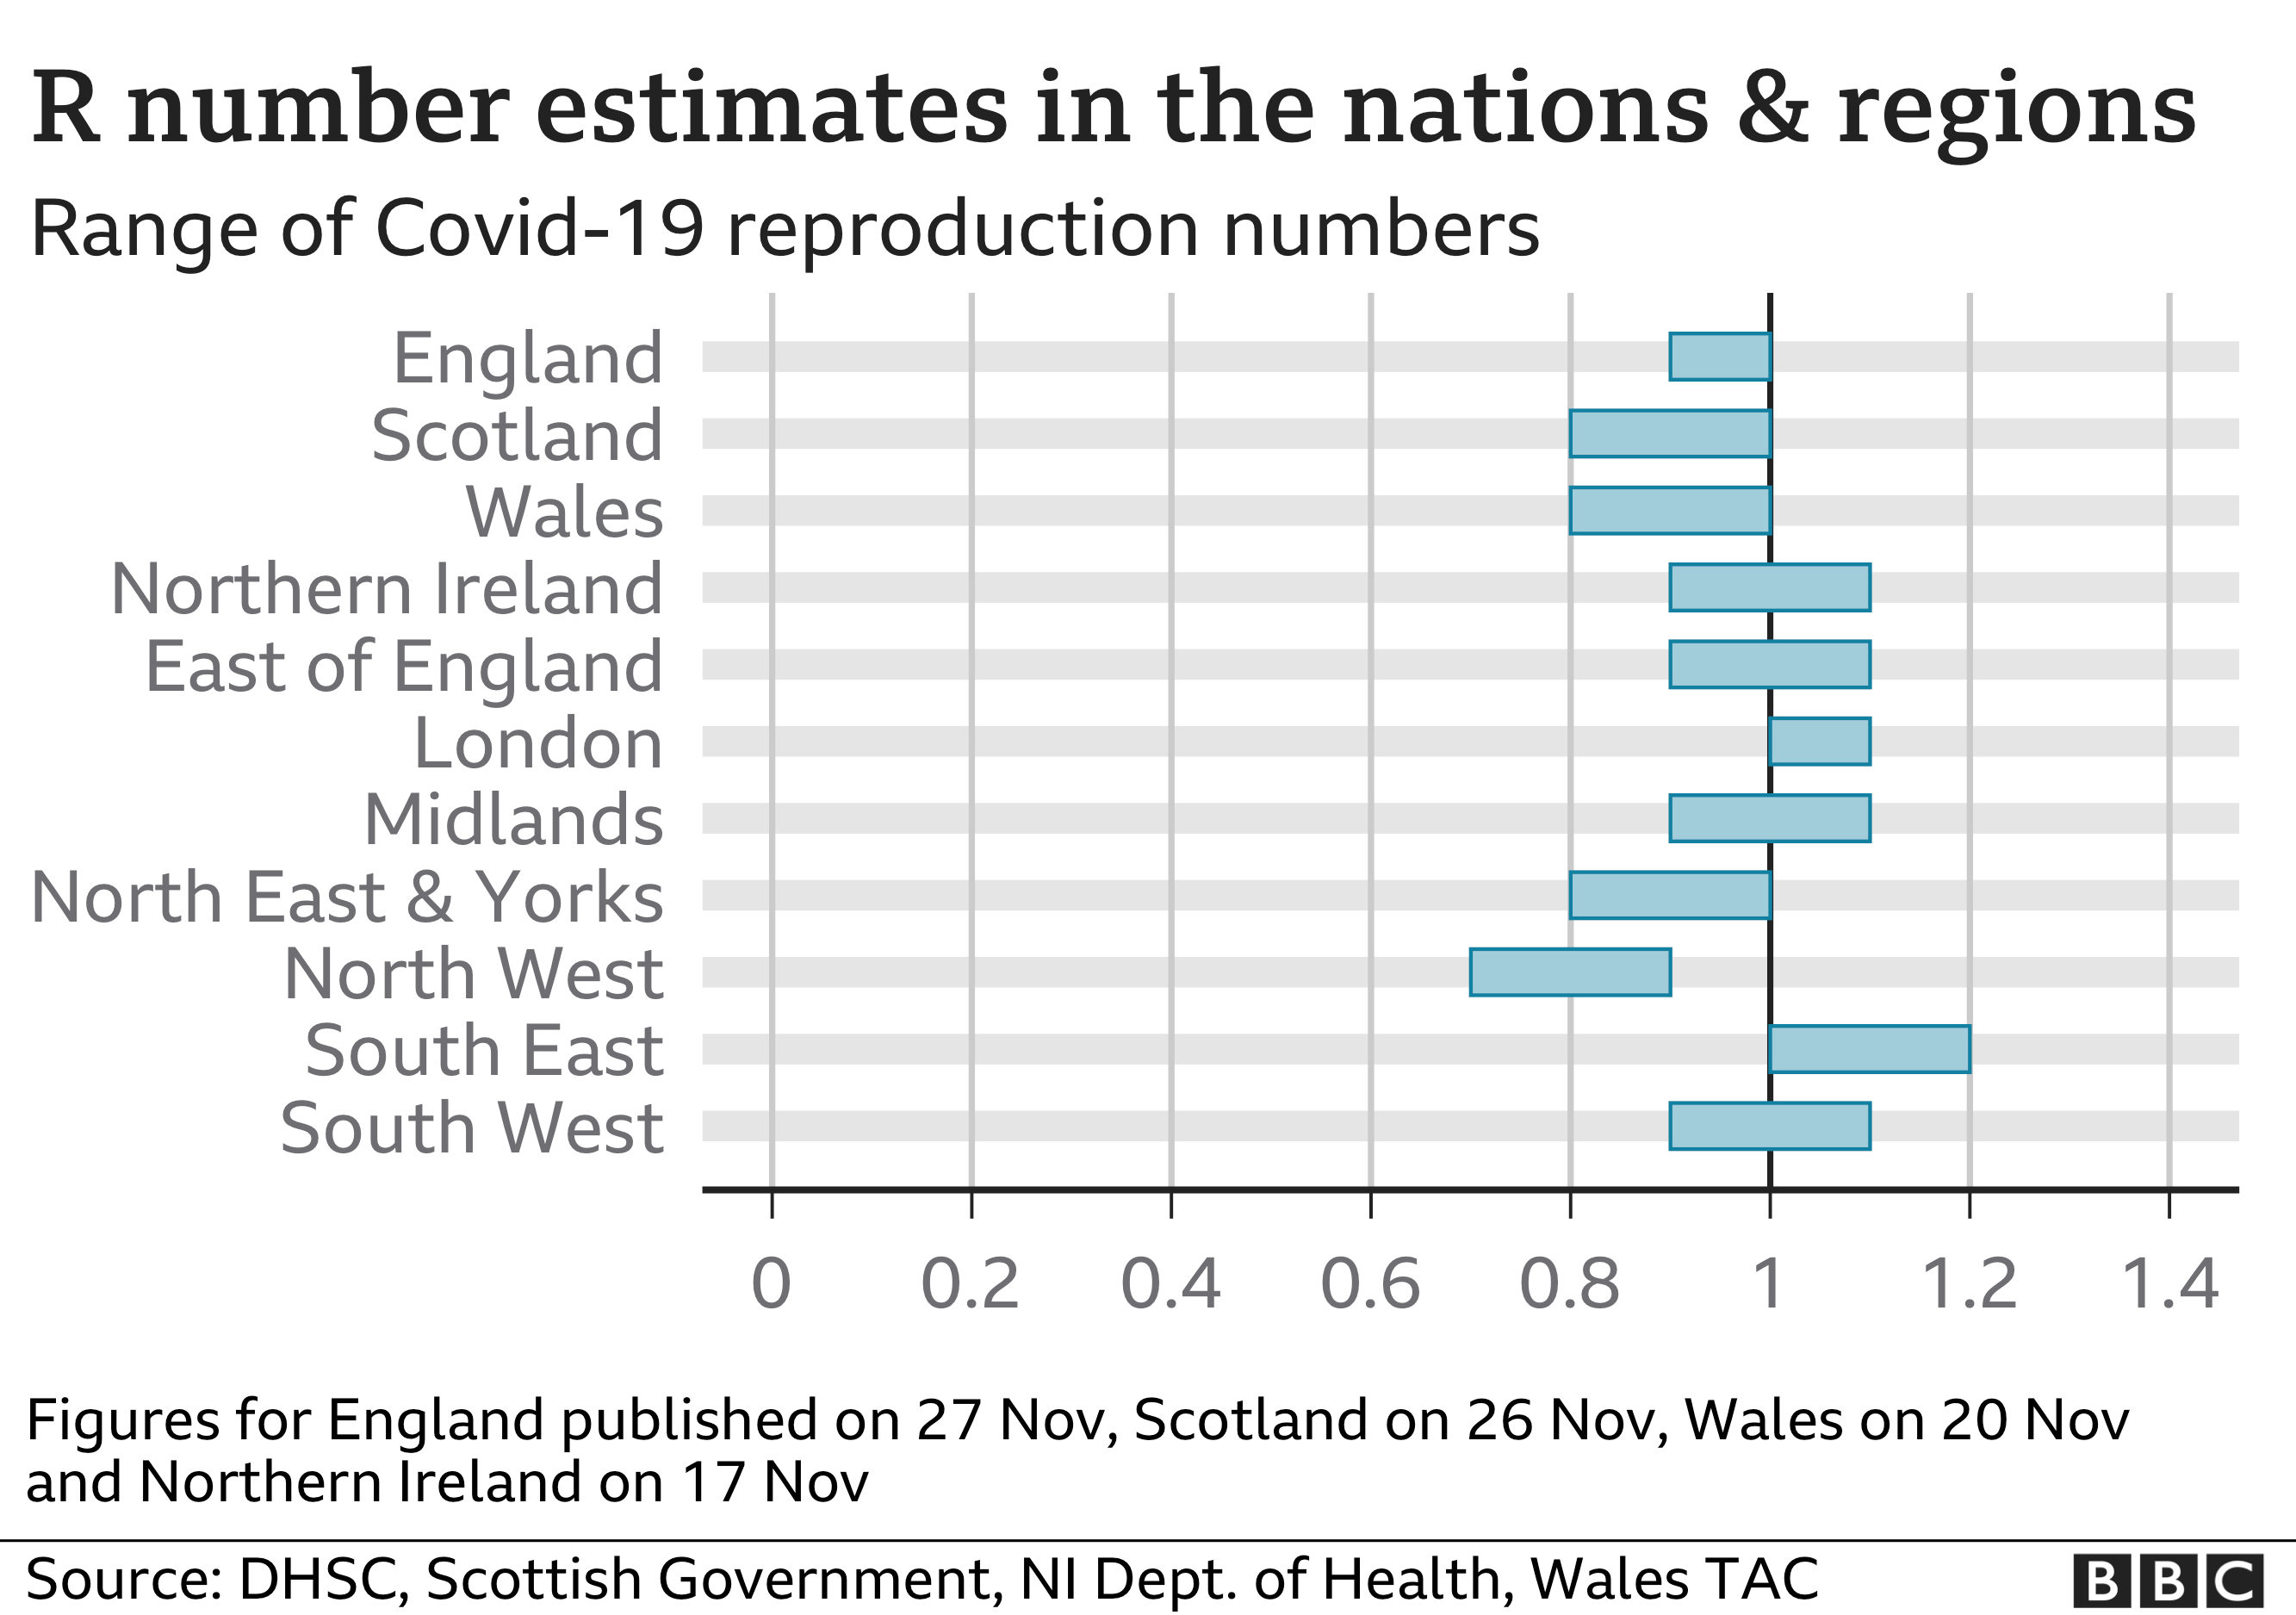 R number estimates for the UK